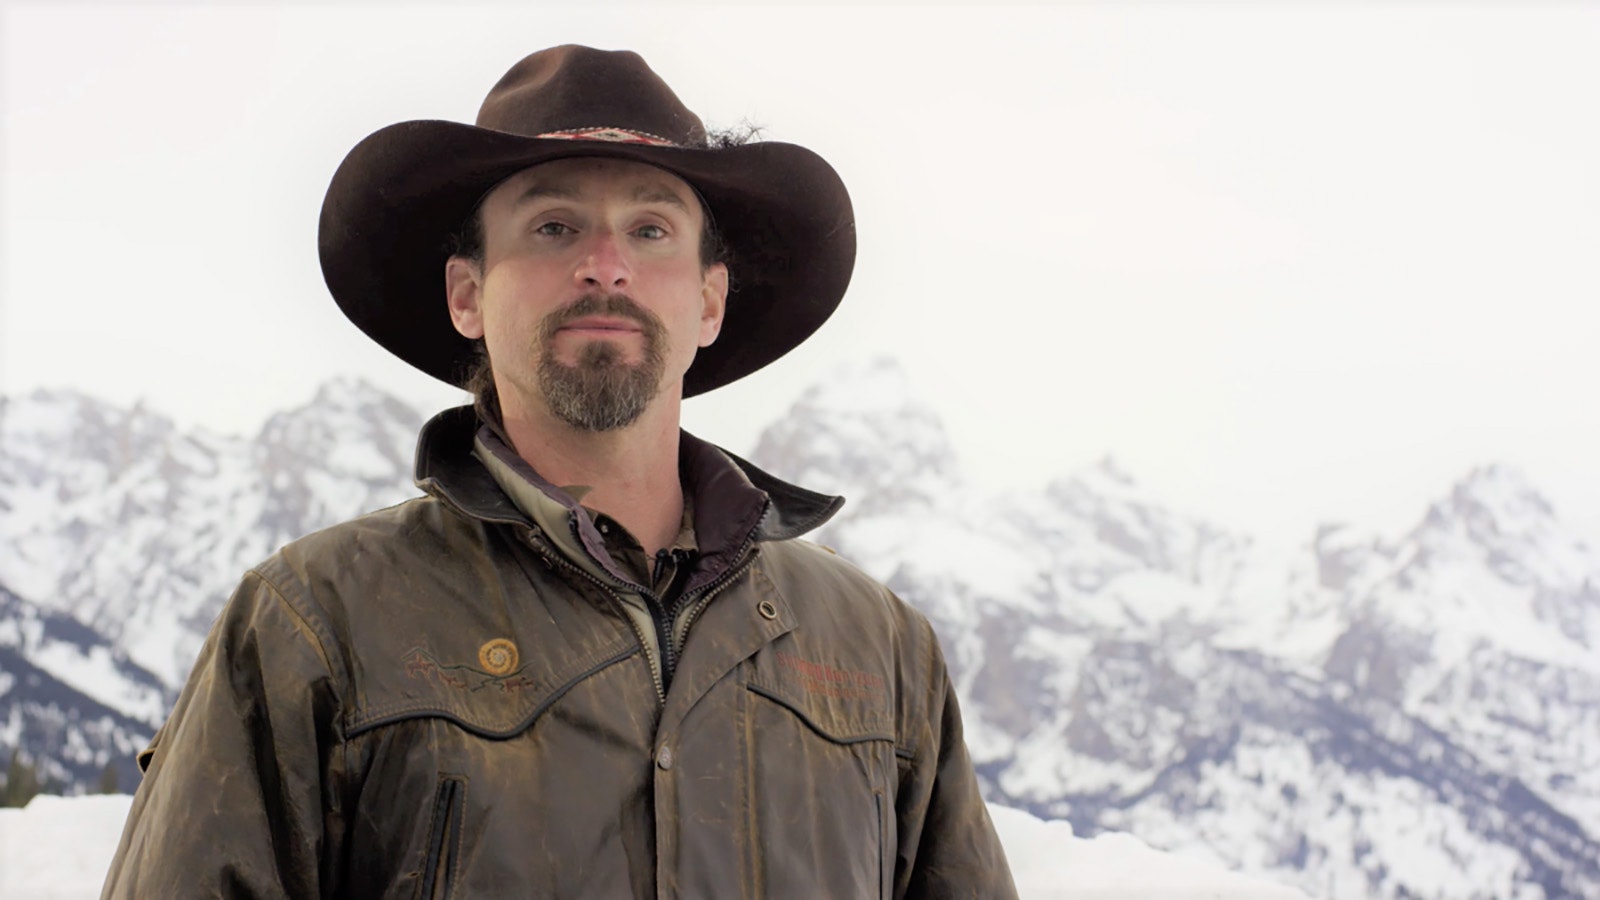 Colorado conservationist Matt Barnes has worked on ranches in Wyoming and Montana and says Colorado’s wolf reintroduction can succeed, if it’s done right.